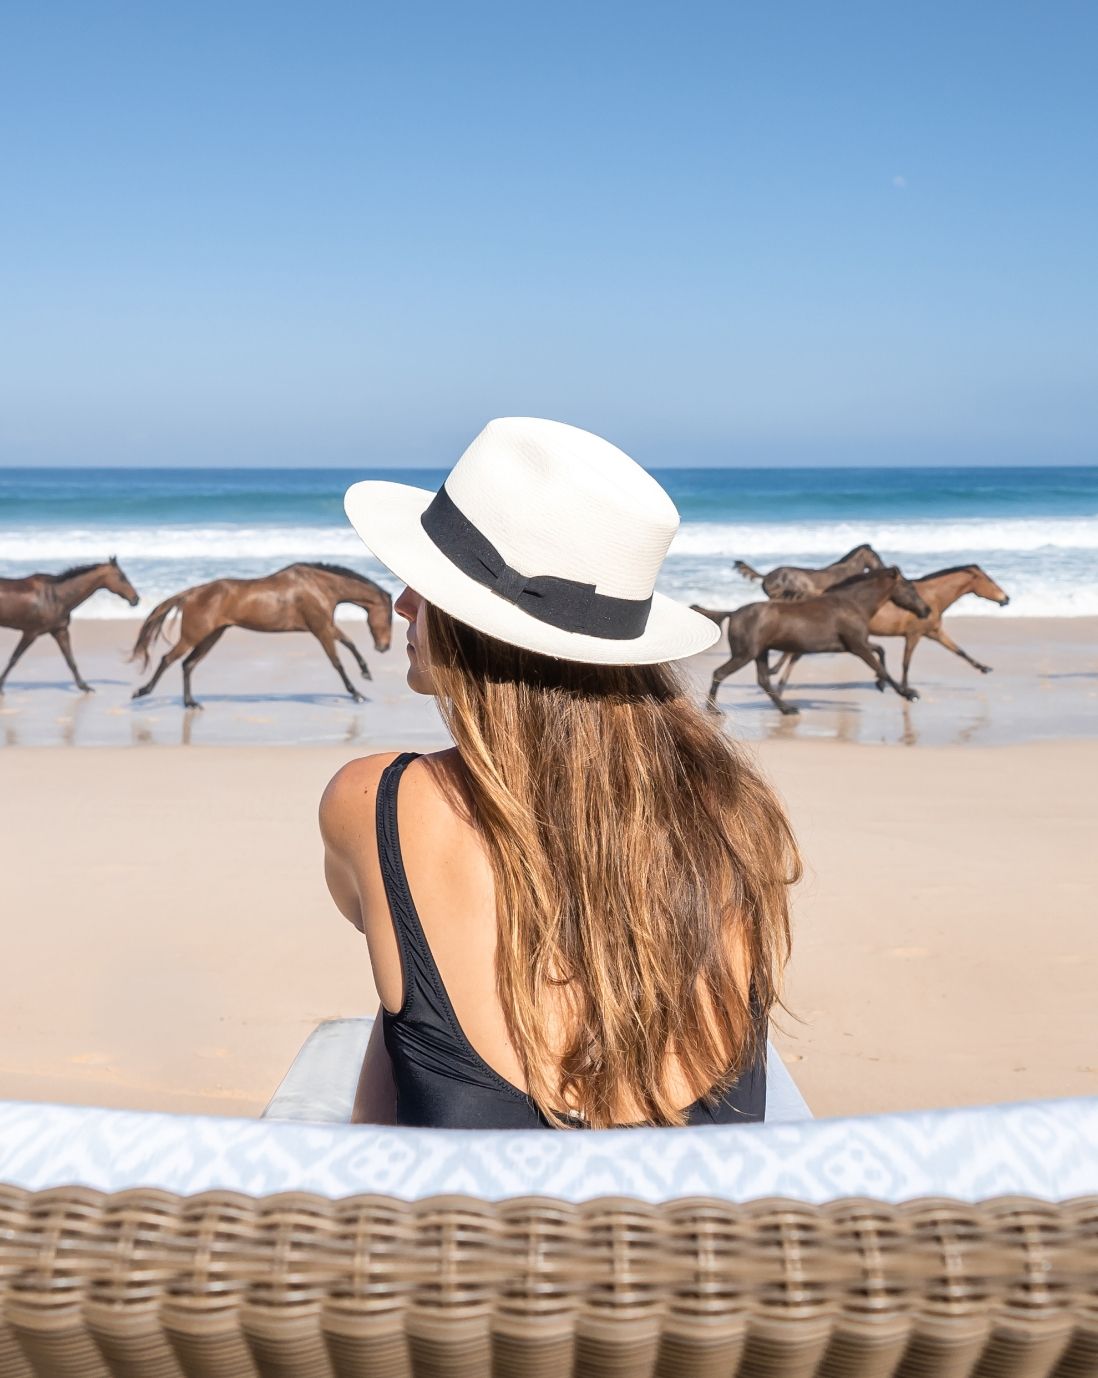 Woman in hat and bathing suite sitting by the ocean with horses running along the shore